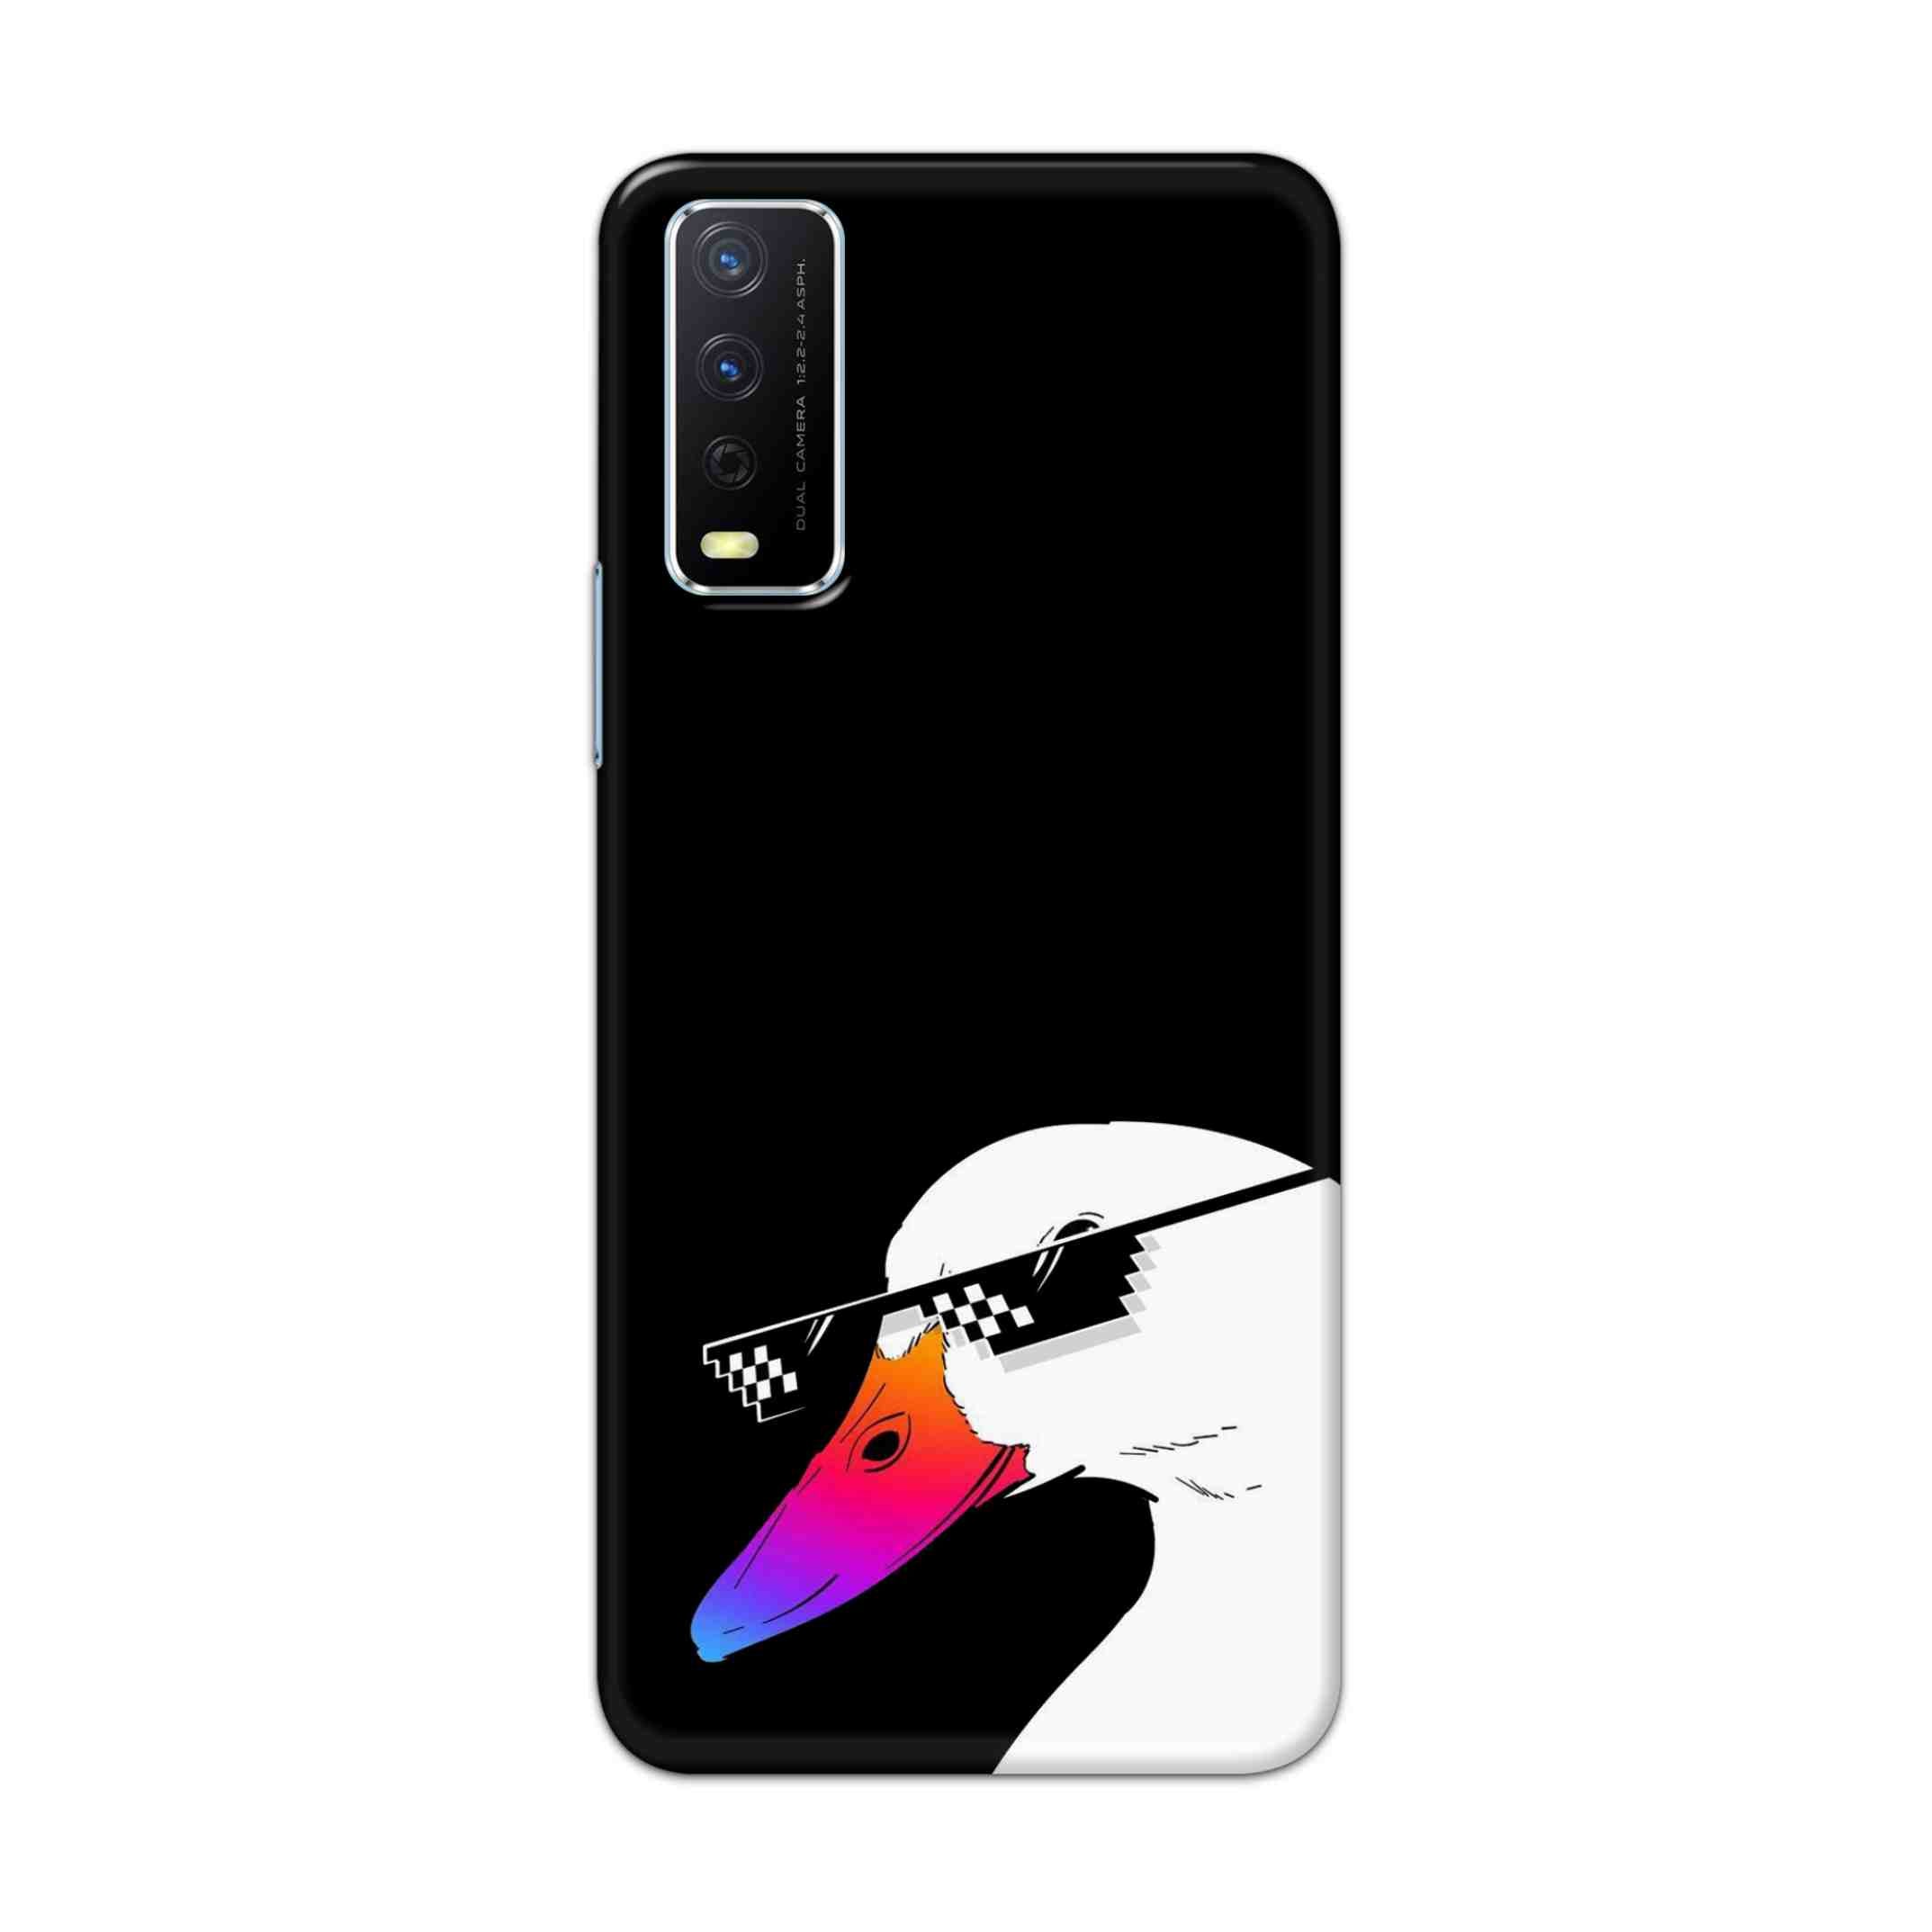 Buy Neon Duck Hard Back Mobile Phone Case Cover For Vivo Y12s Online